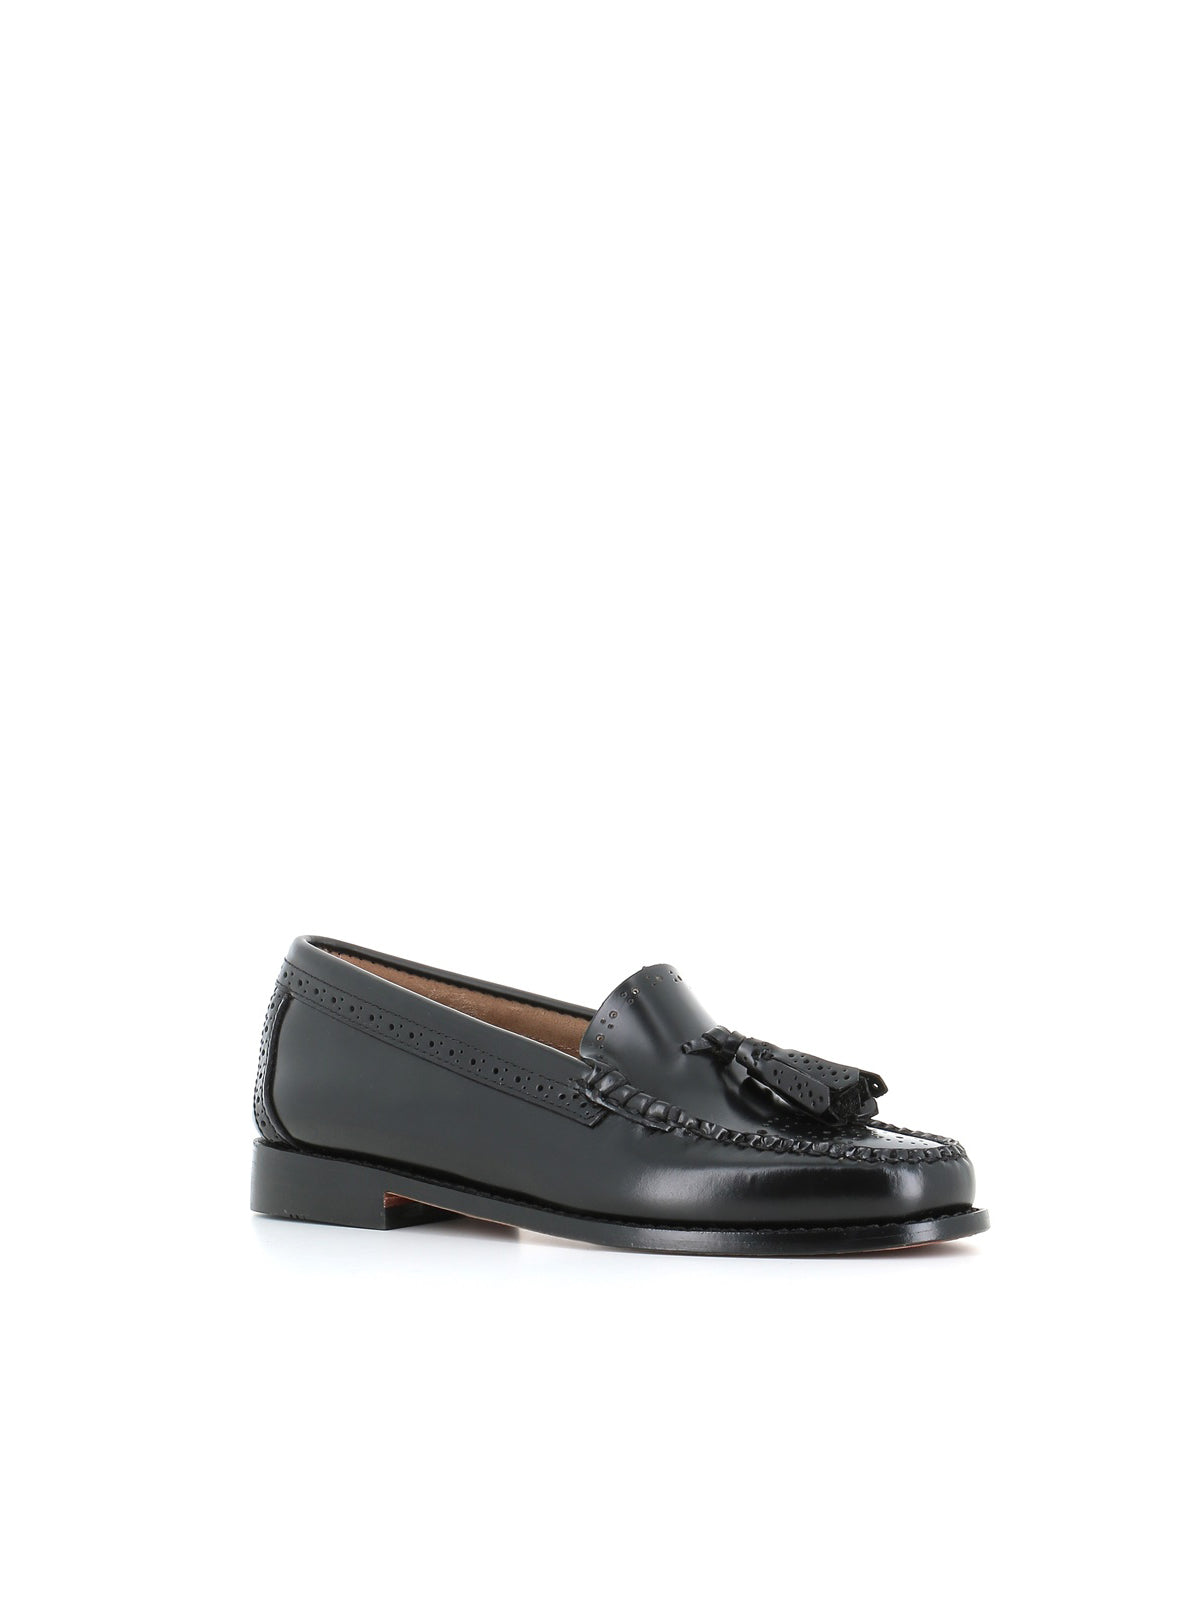  Weejuns By G.h Bass & Co. Mocassino Nappe Estrelle Brogue Nero Donna - 3